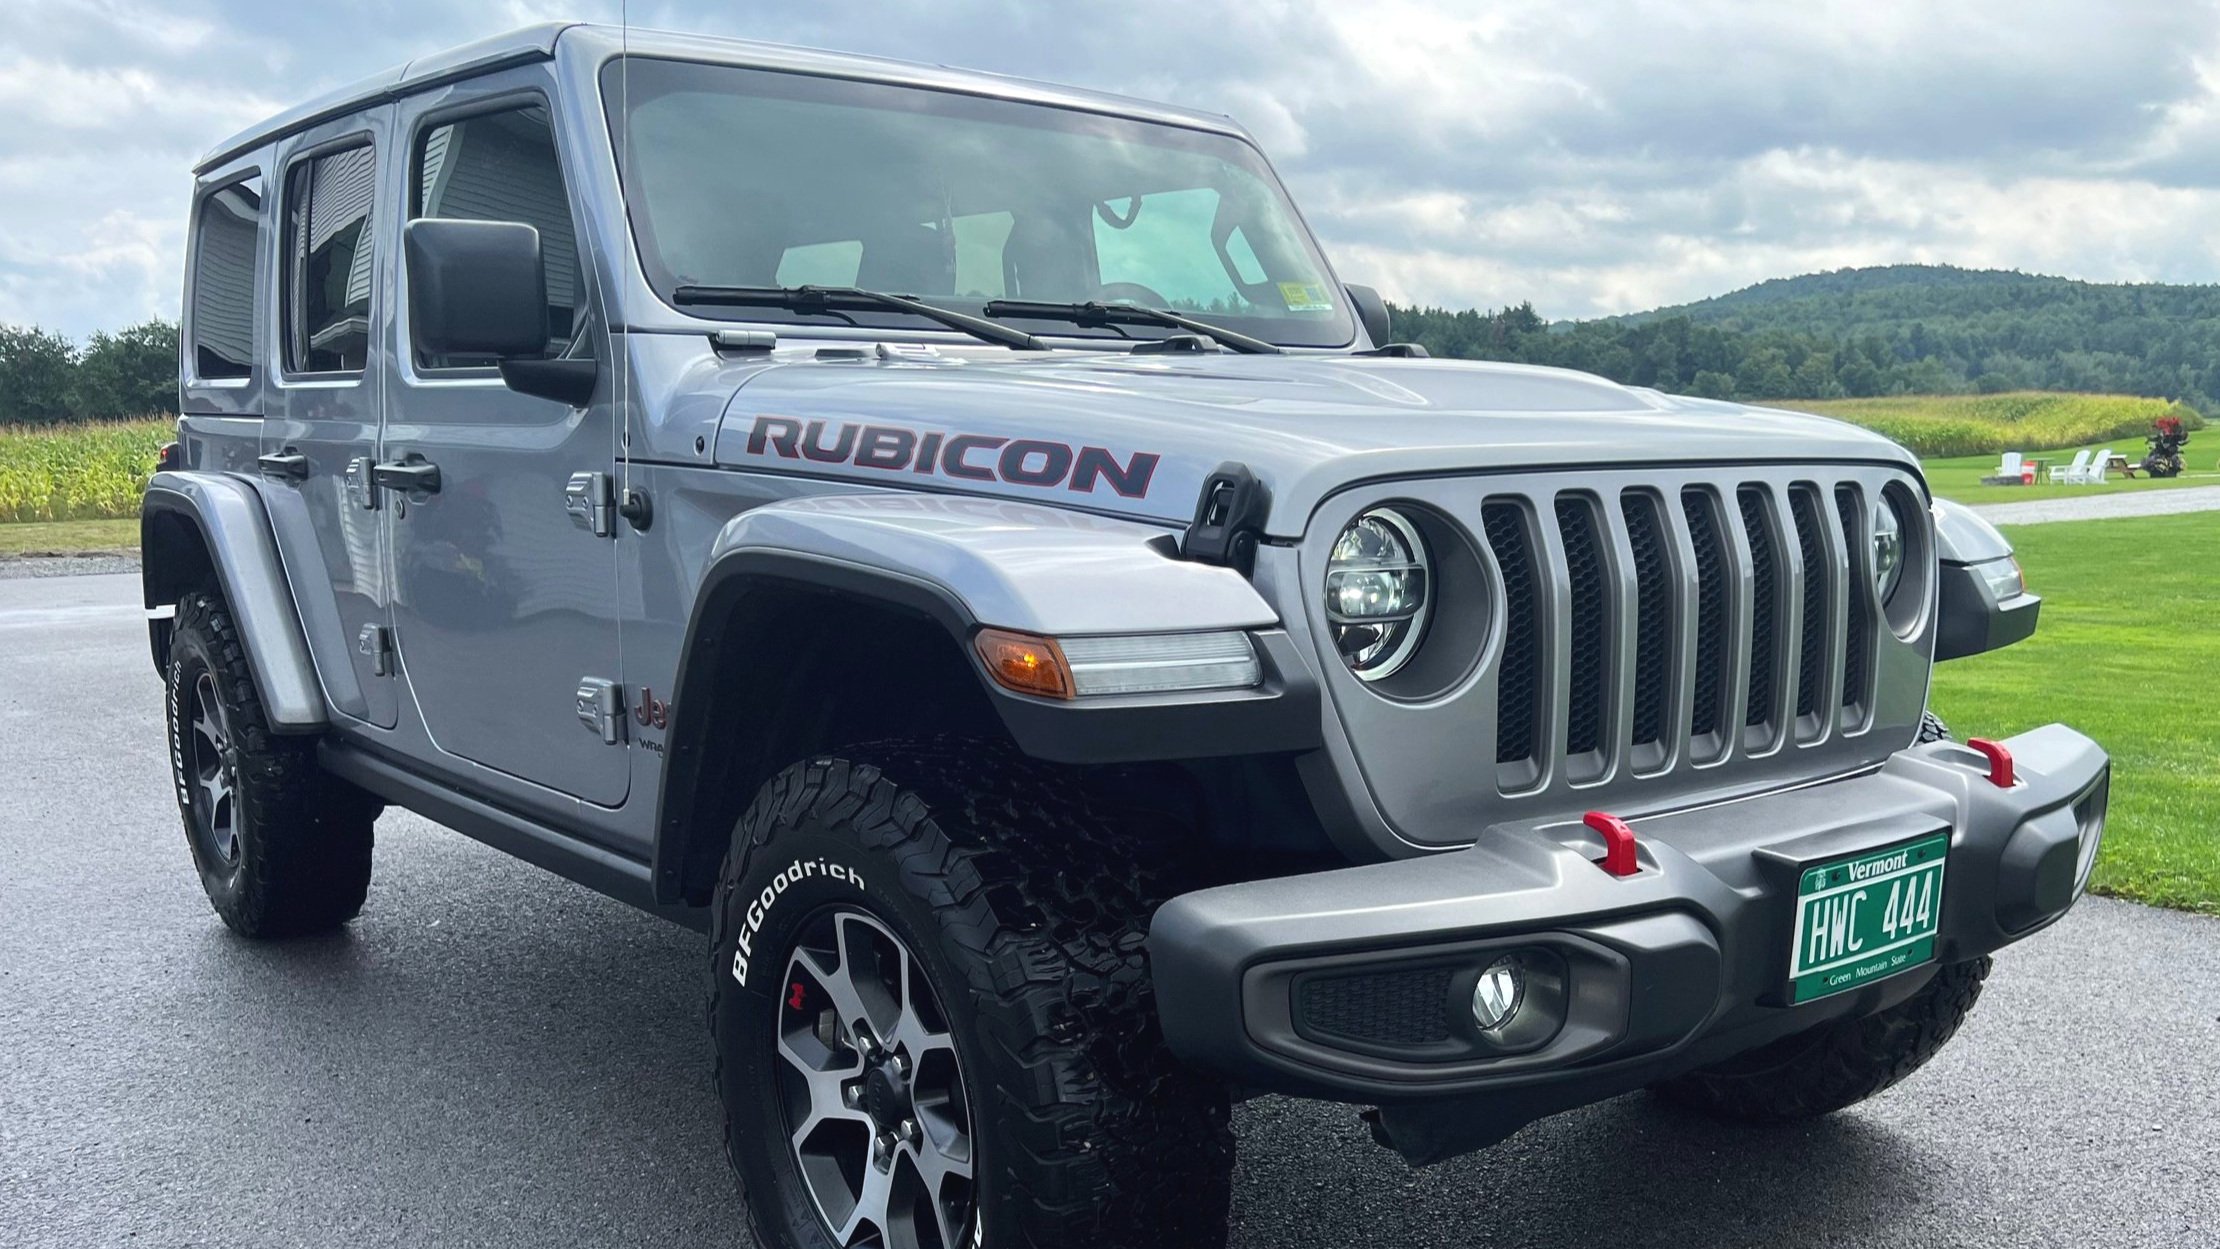 Clean Jeep Rubicon Professional Detailed by Gloss Guru, VT in Enosburg Vermont, Franklin County. 